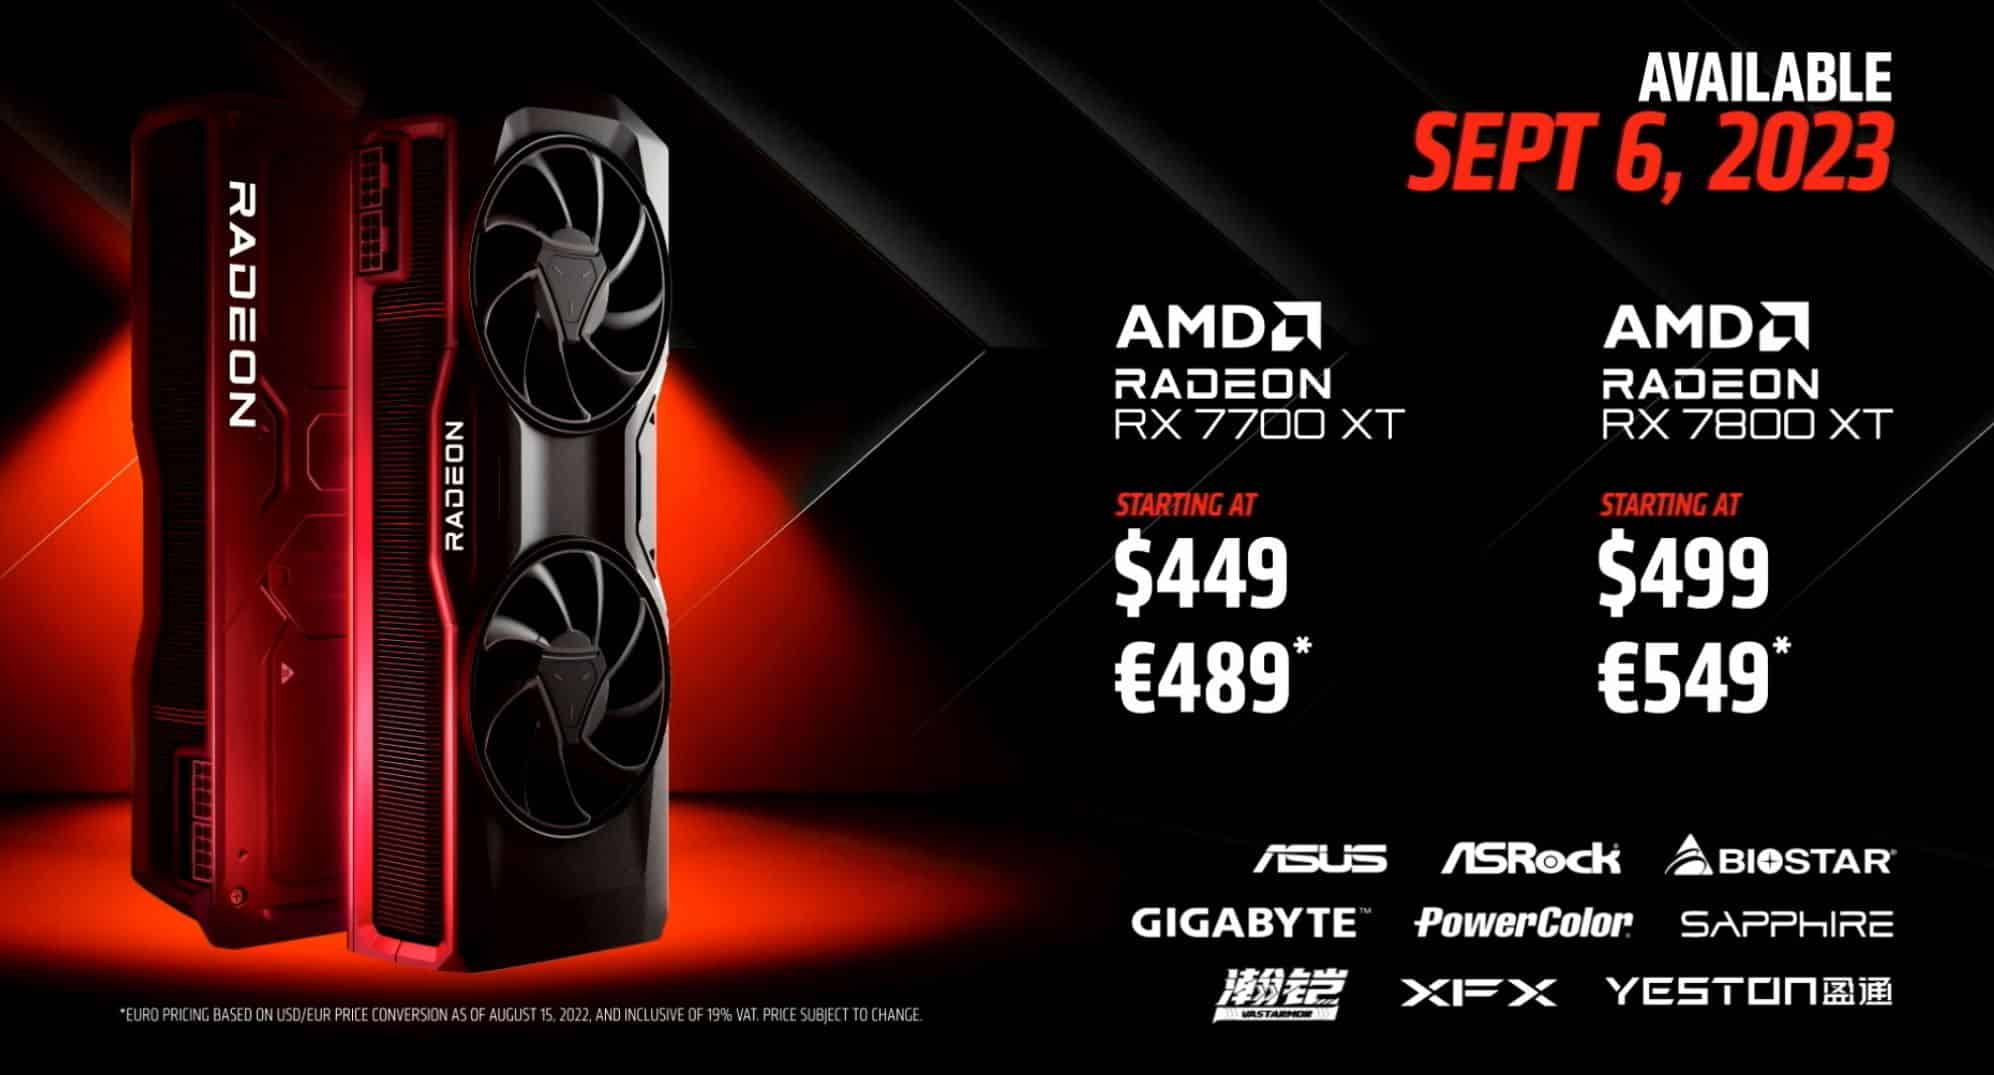 AMD RX7800 7700 PRICING RELEASE DATE